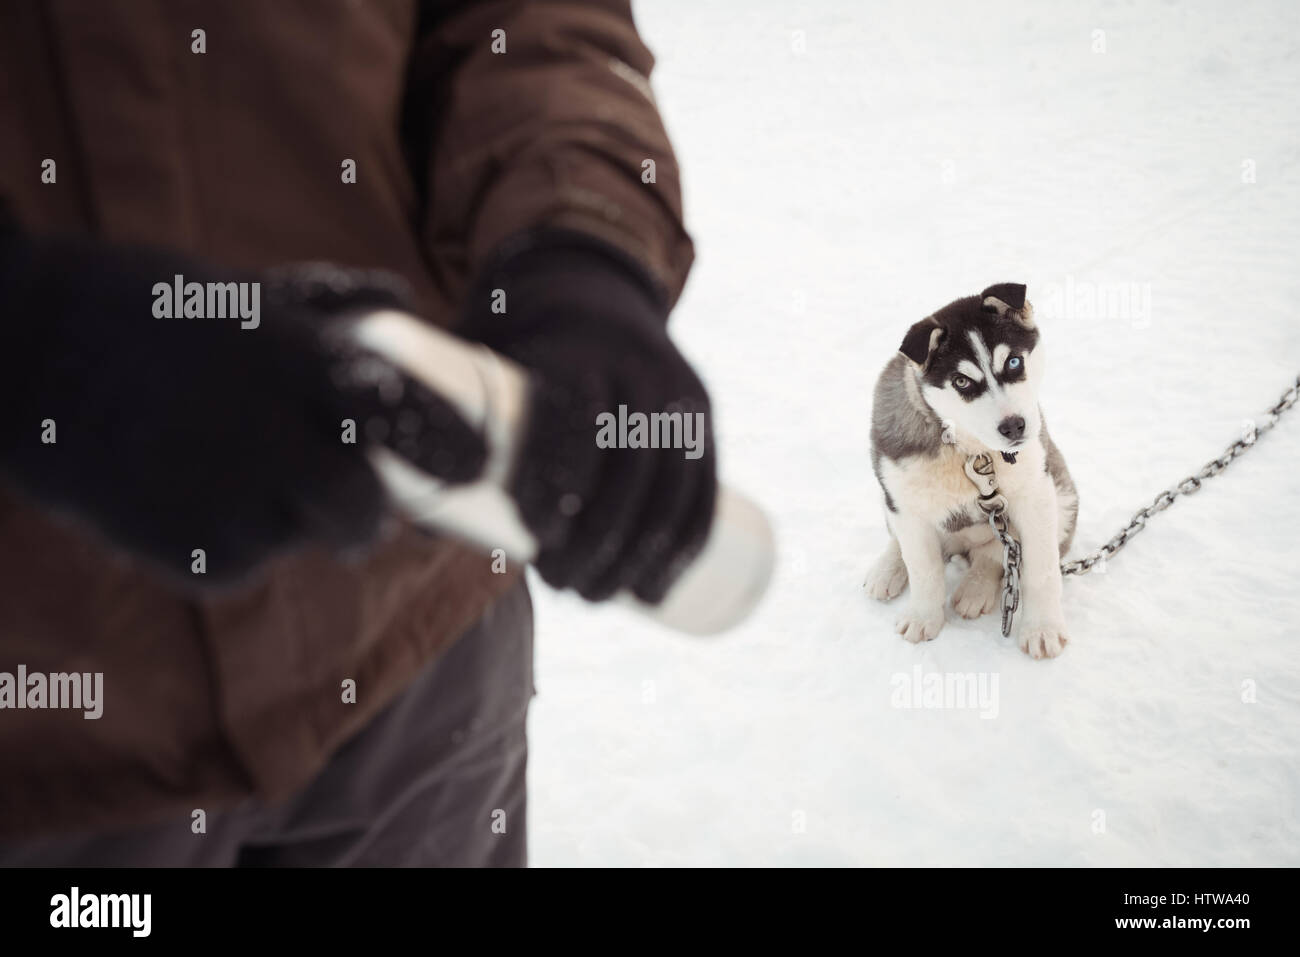 Musher holding thermos while Siberian dog sitting on snow Stock Photo